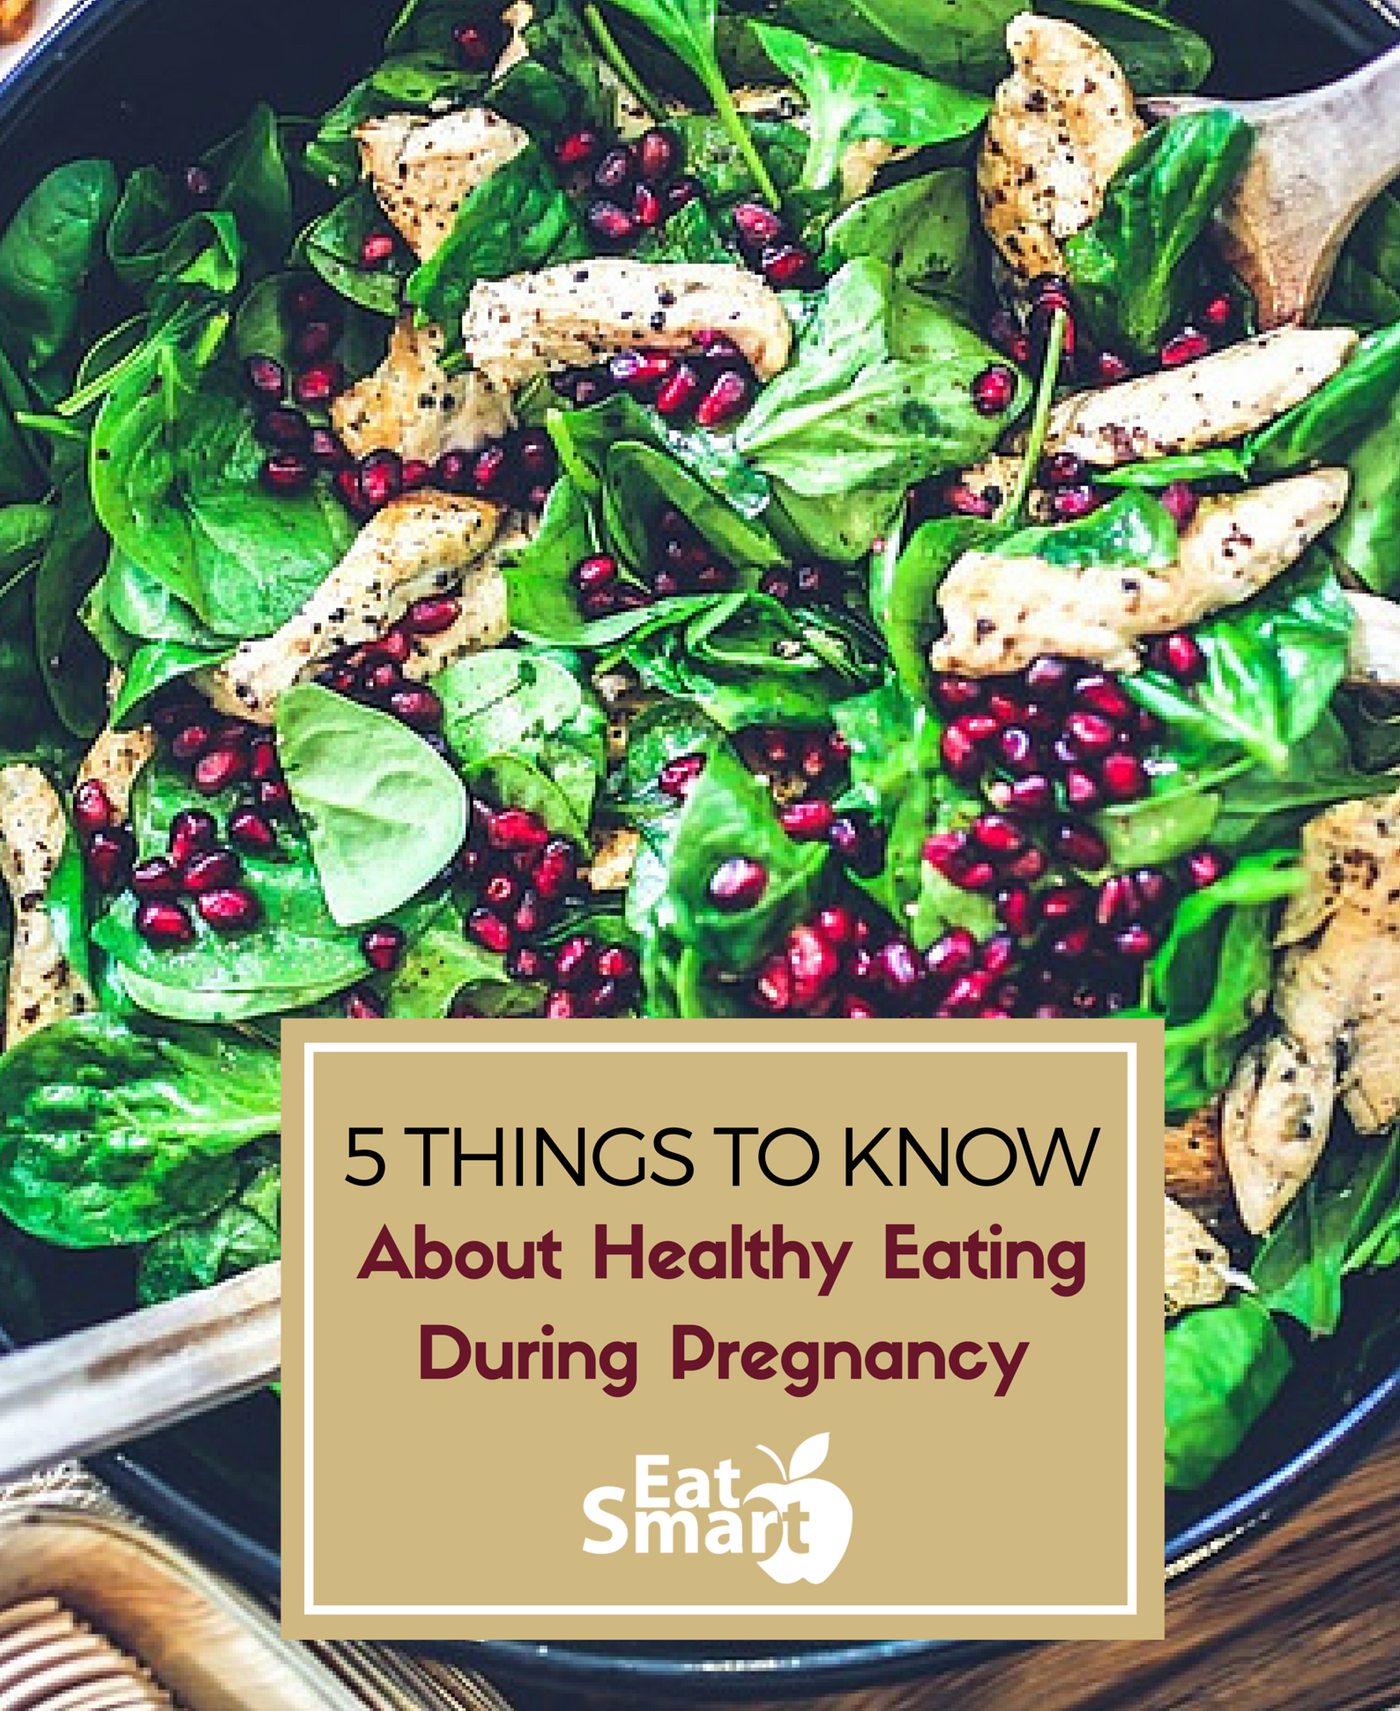 5 Things To Know About Healthy Eating During Pregnancy